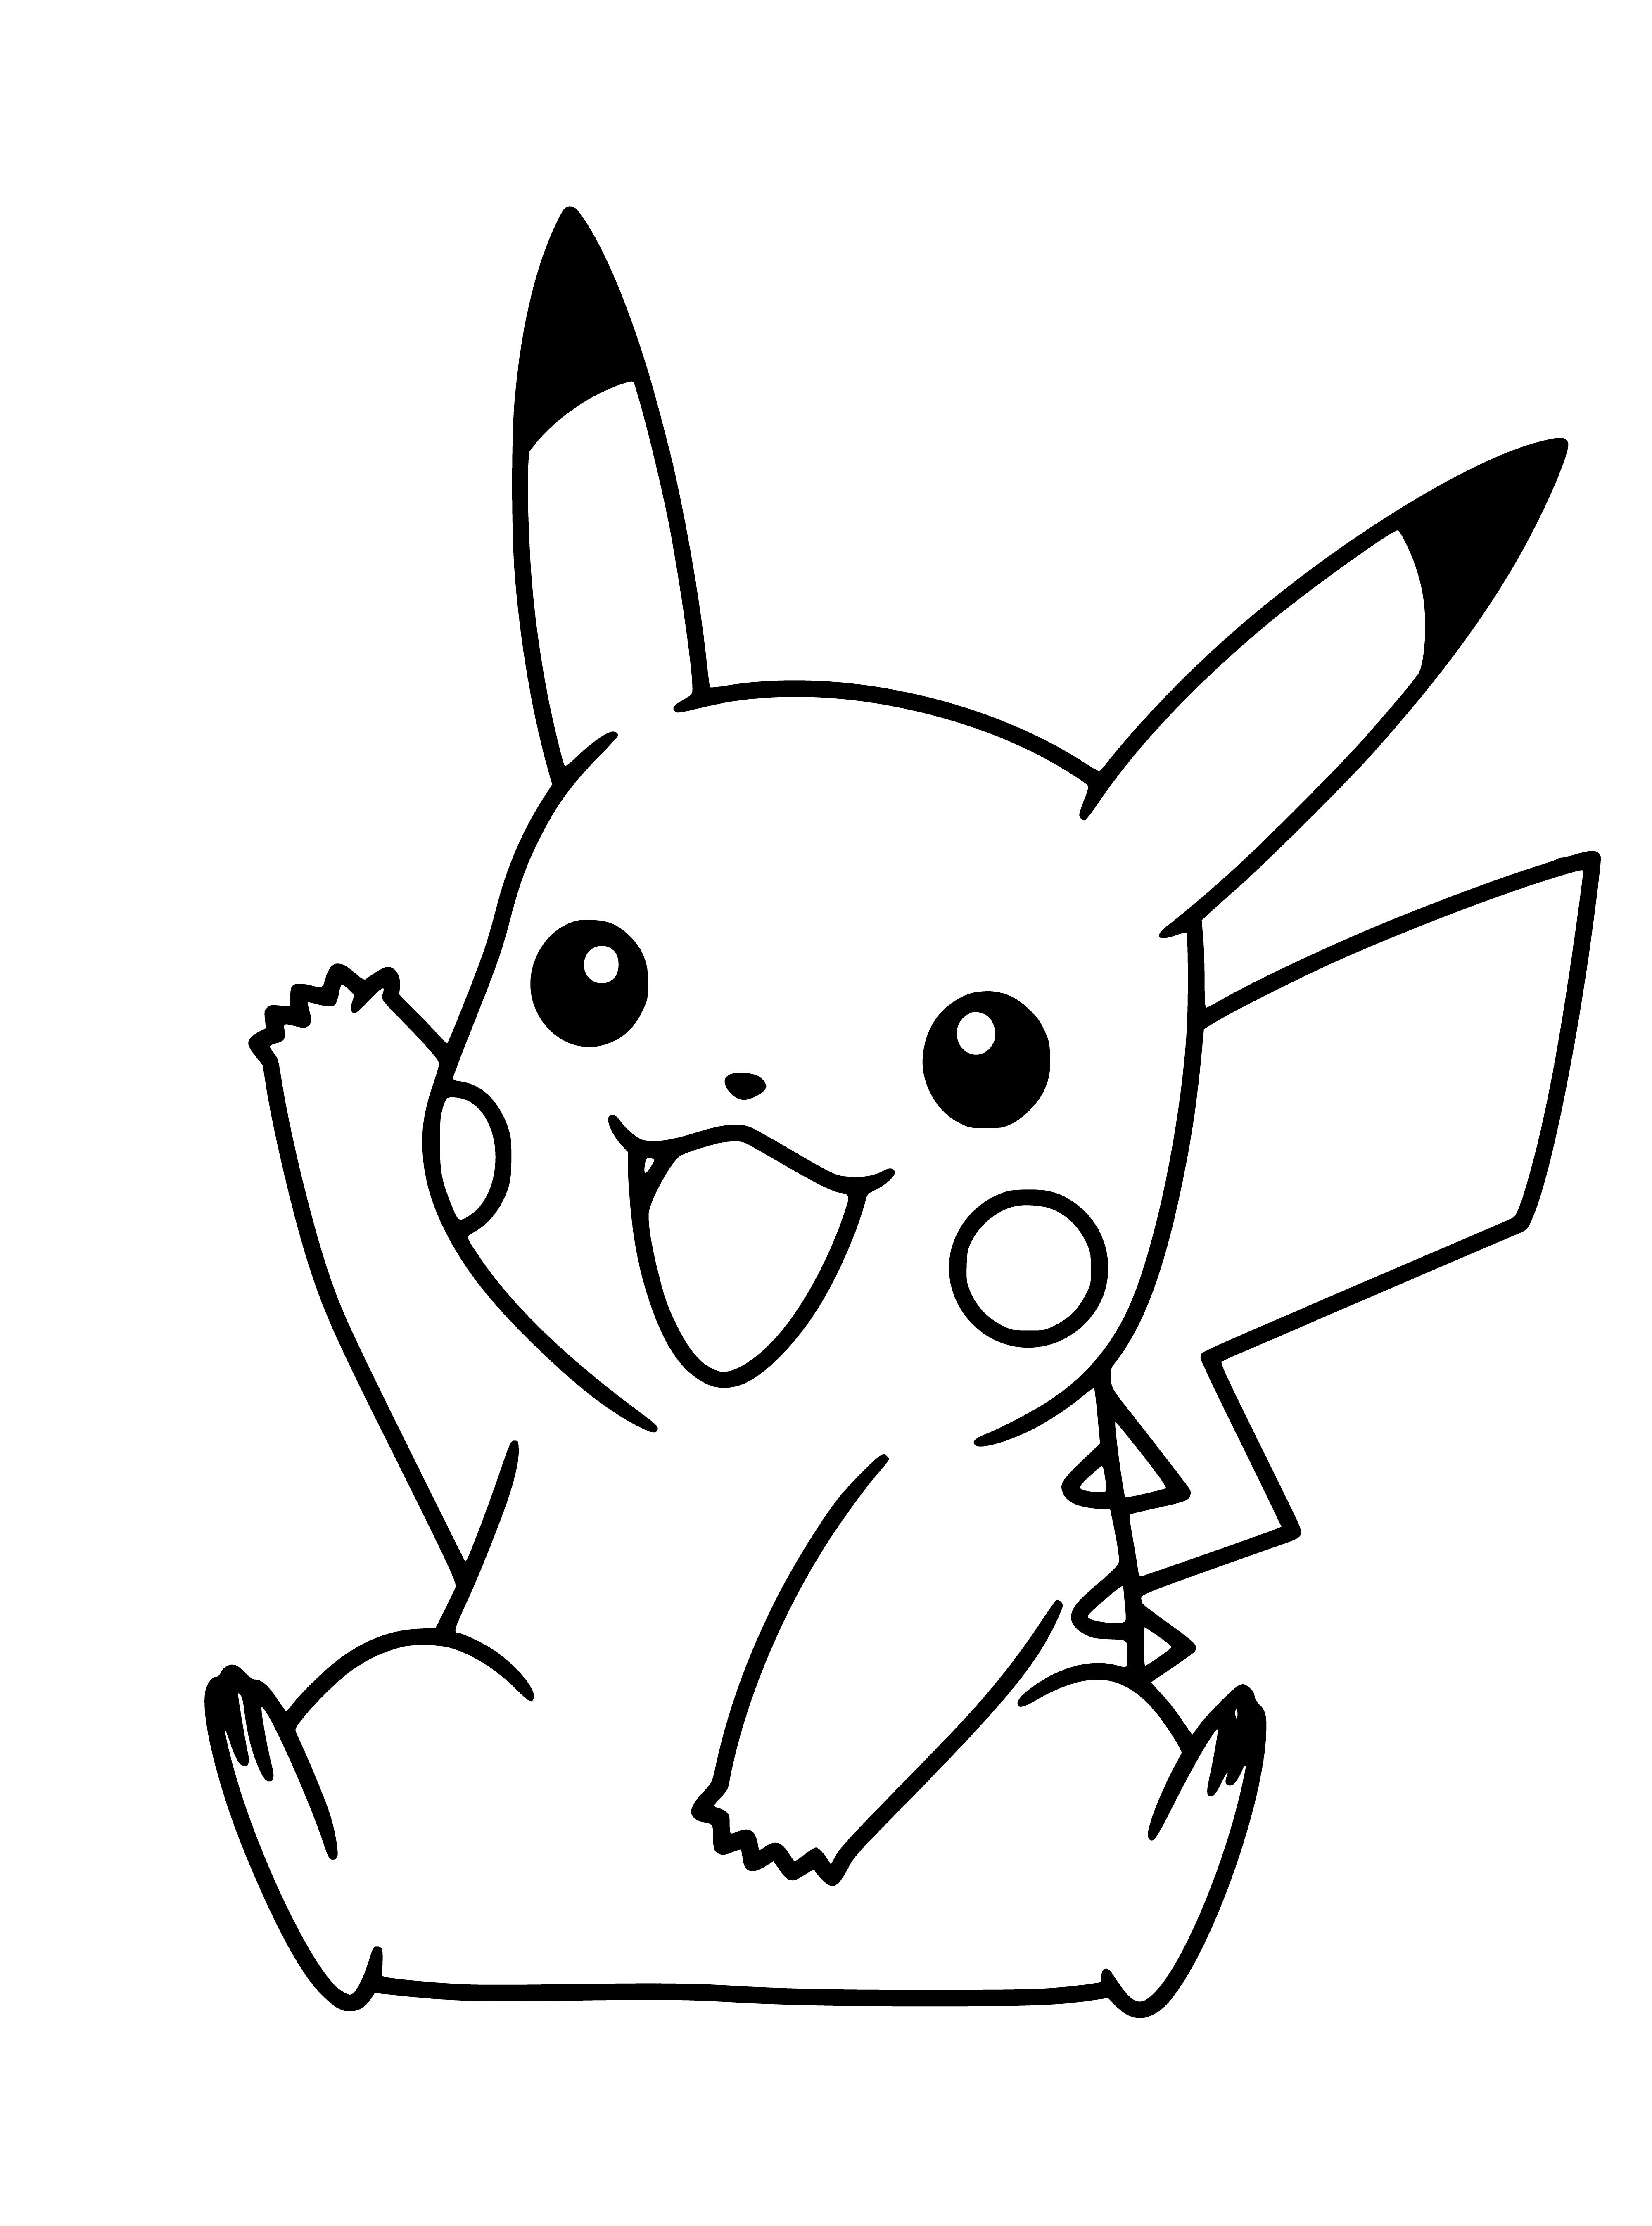 Pikachu coloring page